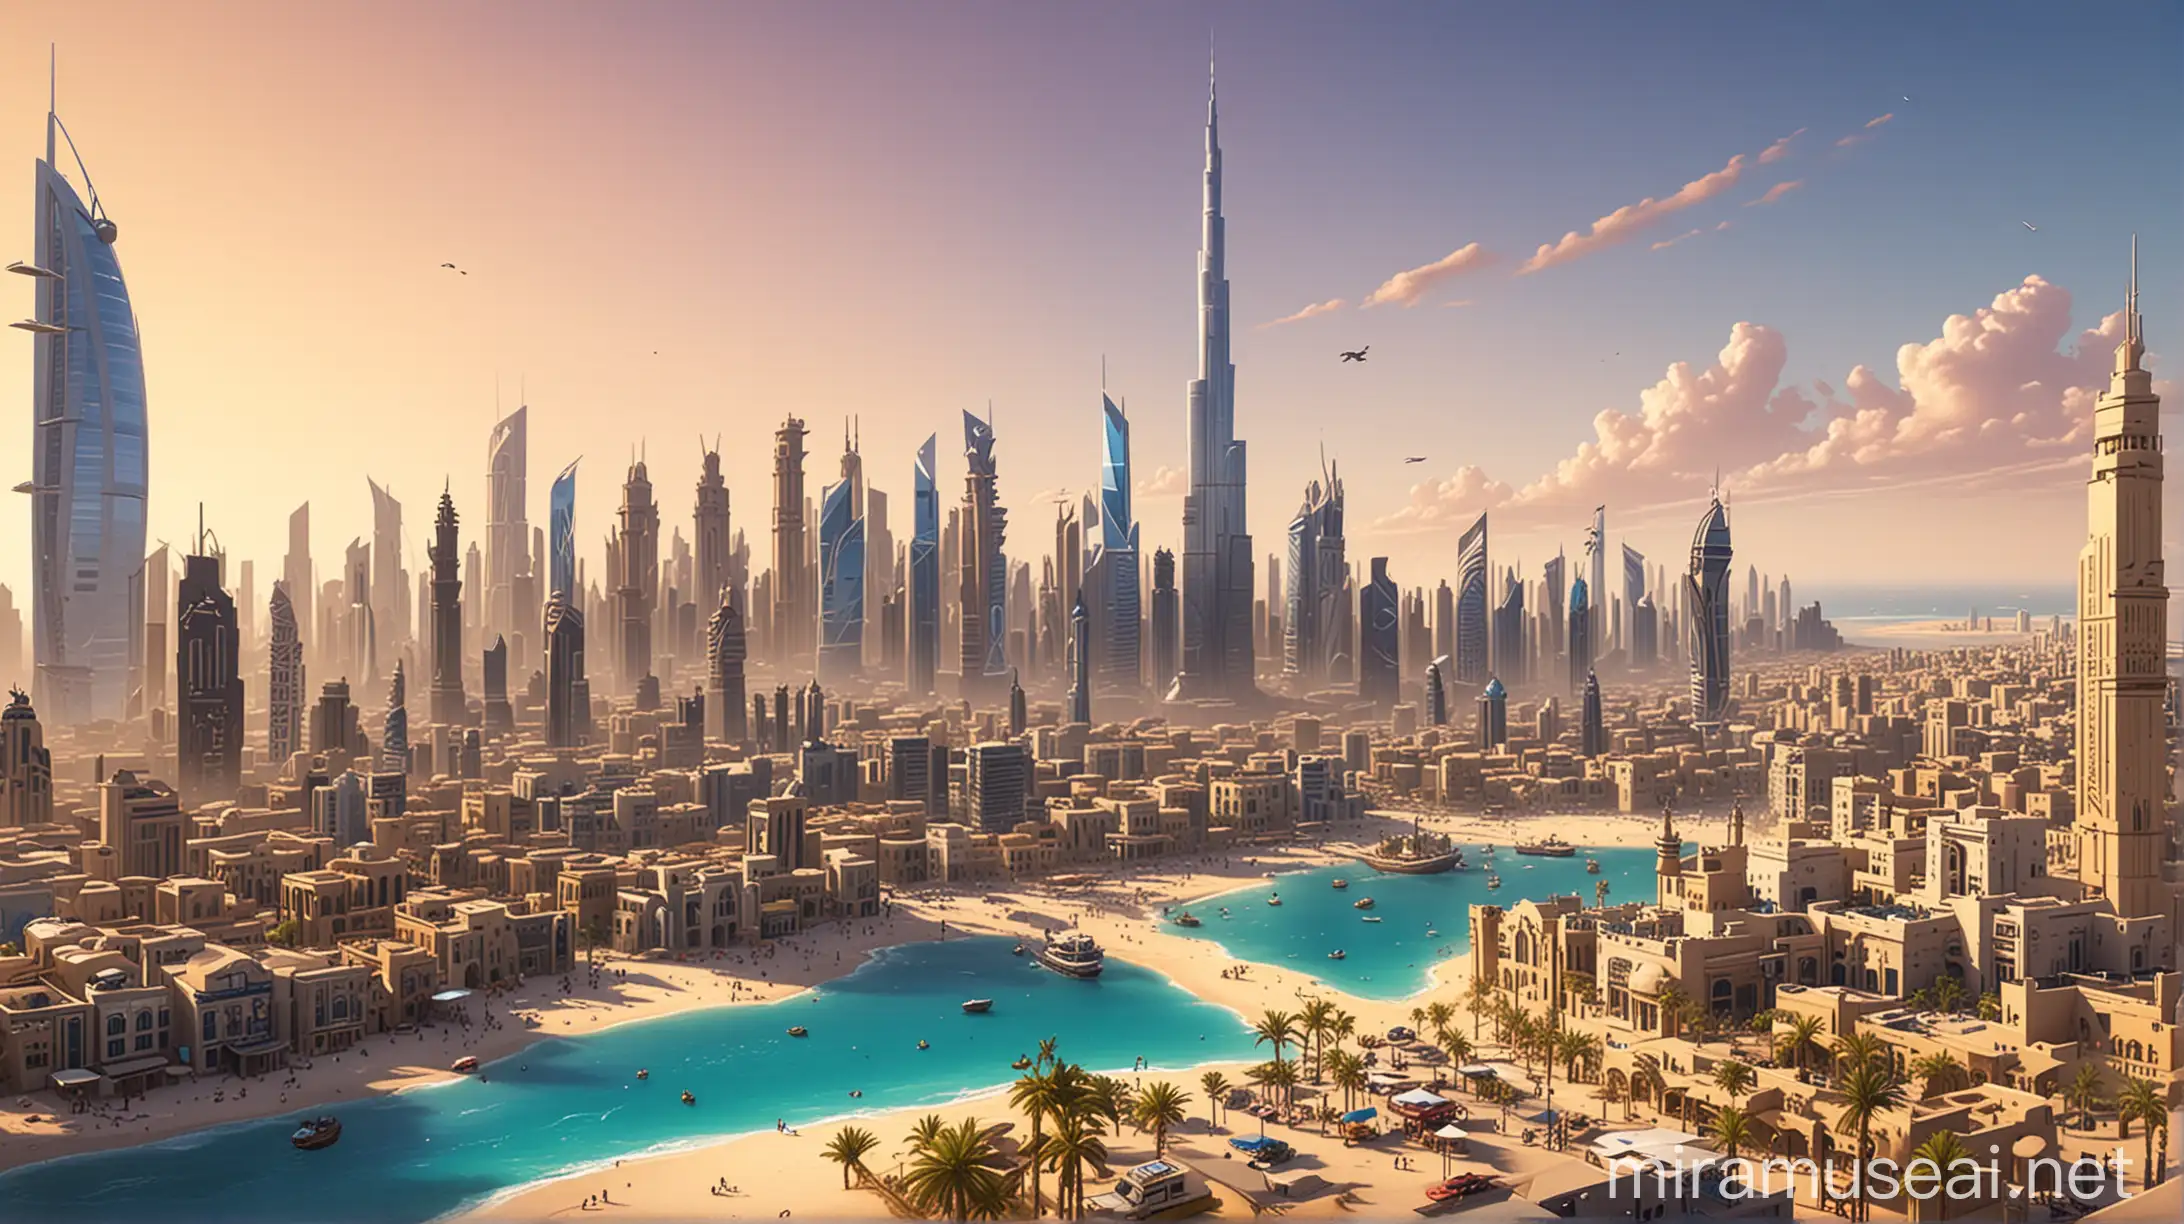 Dubai in cartoon and fortnite style at day